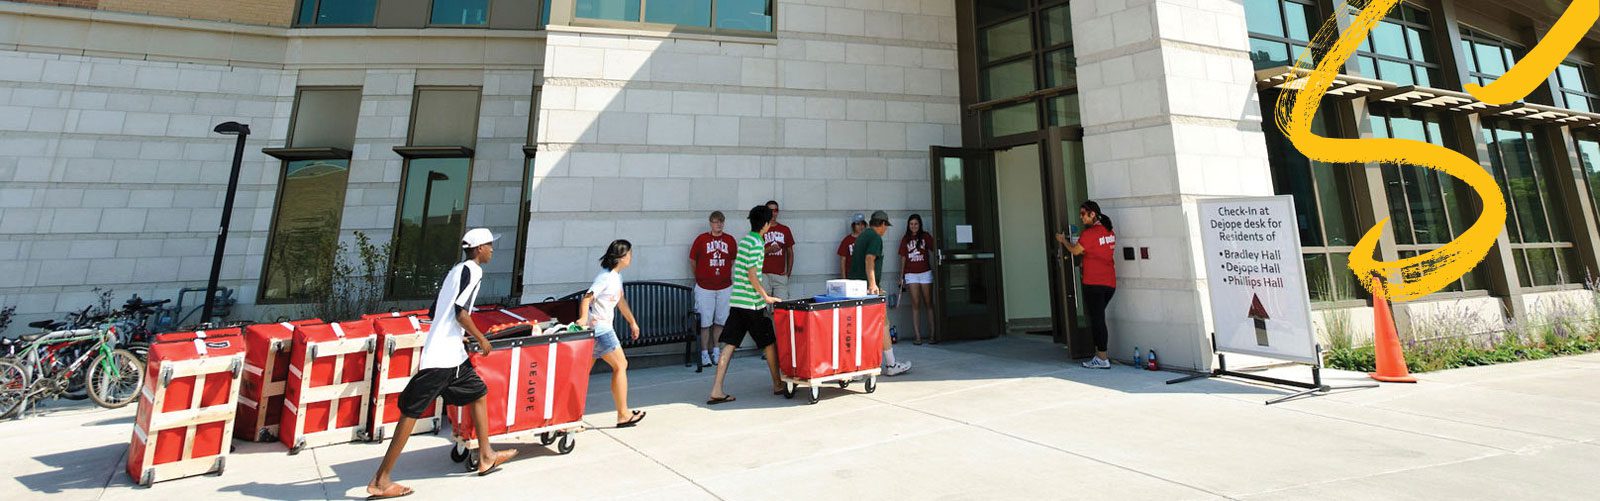 Students moving into Dejope Hall